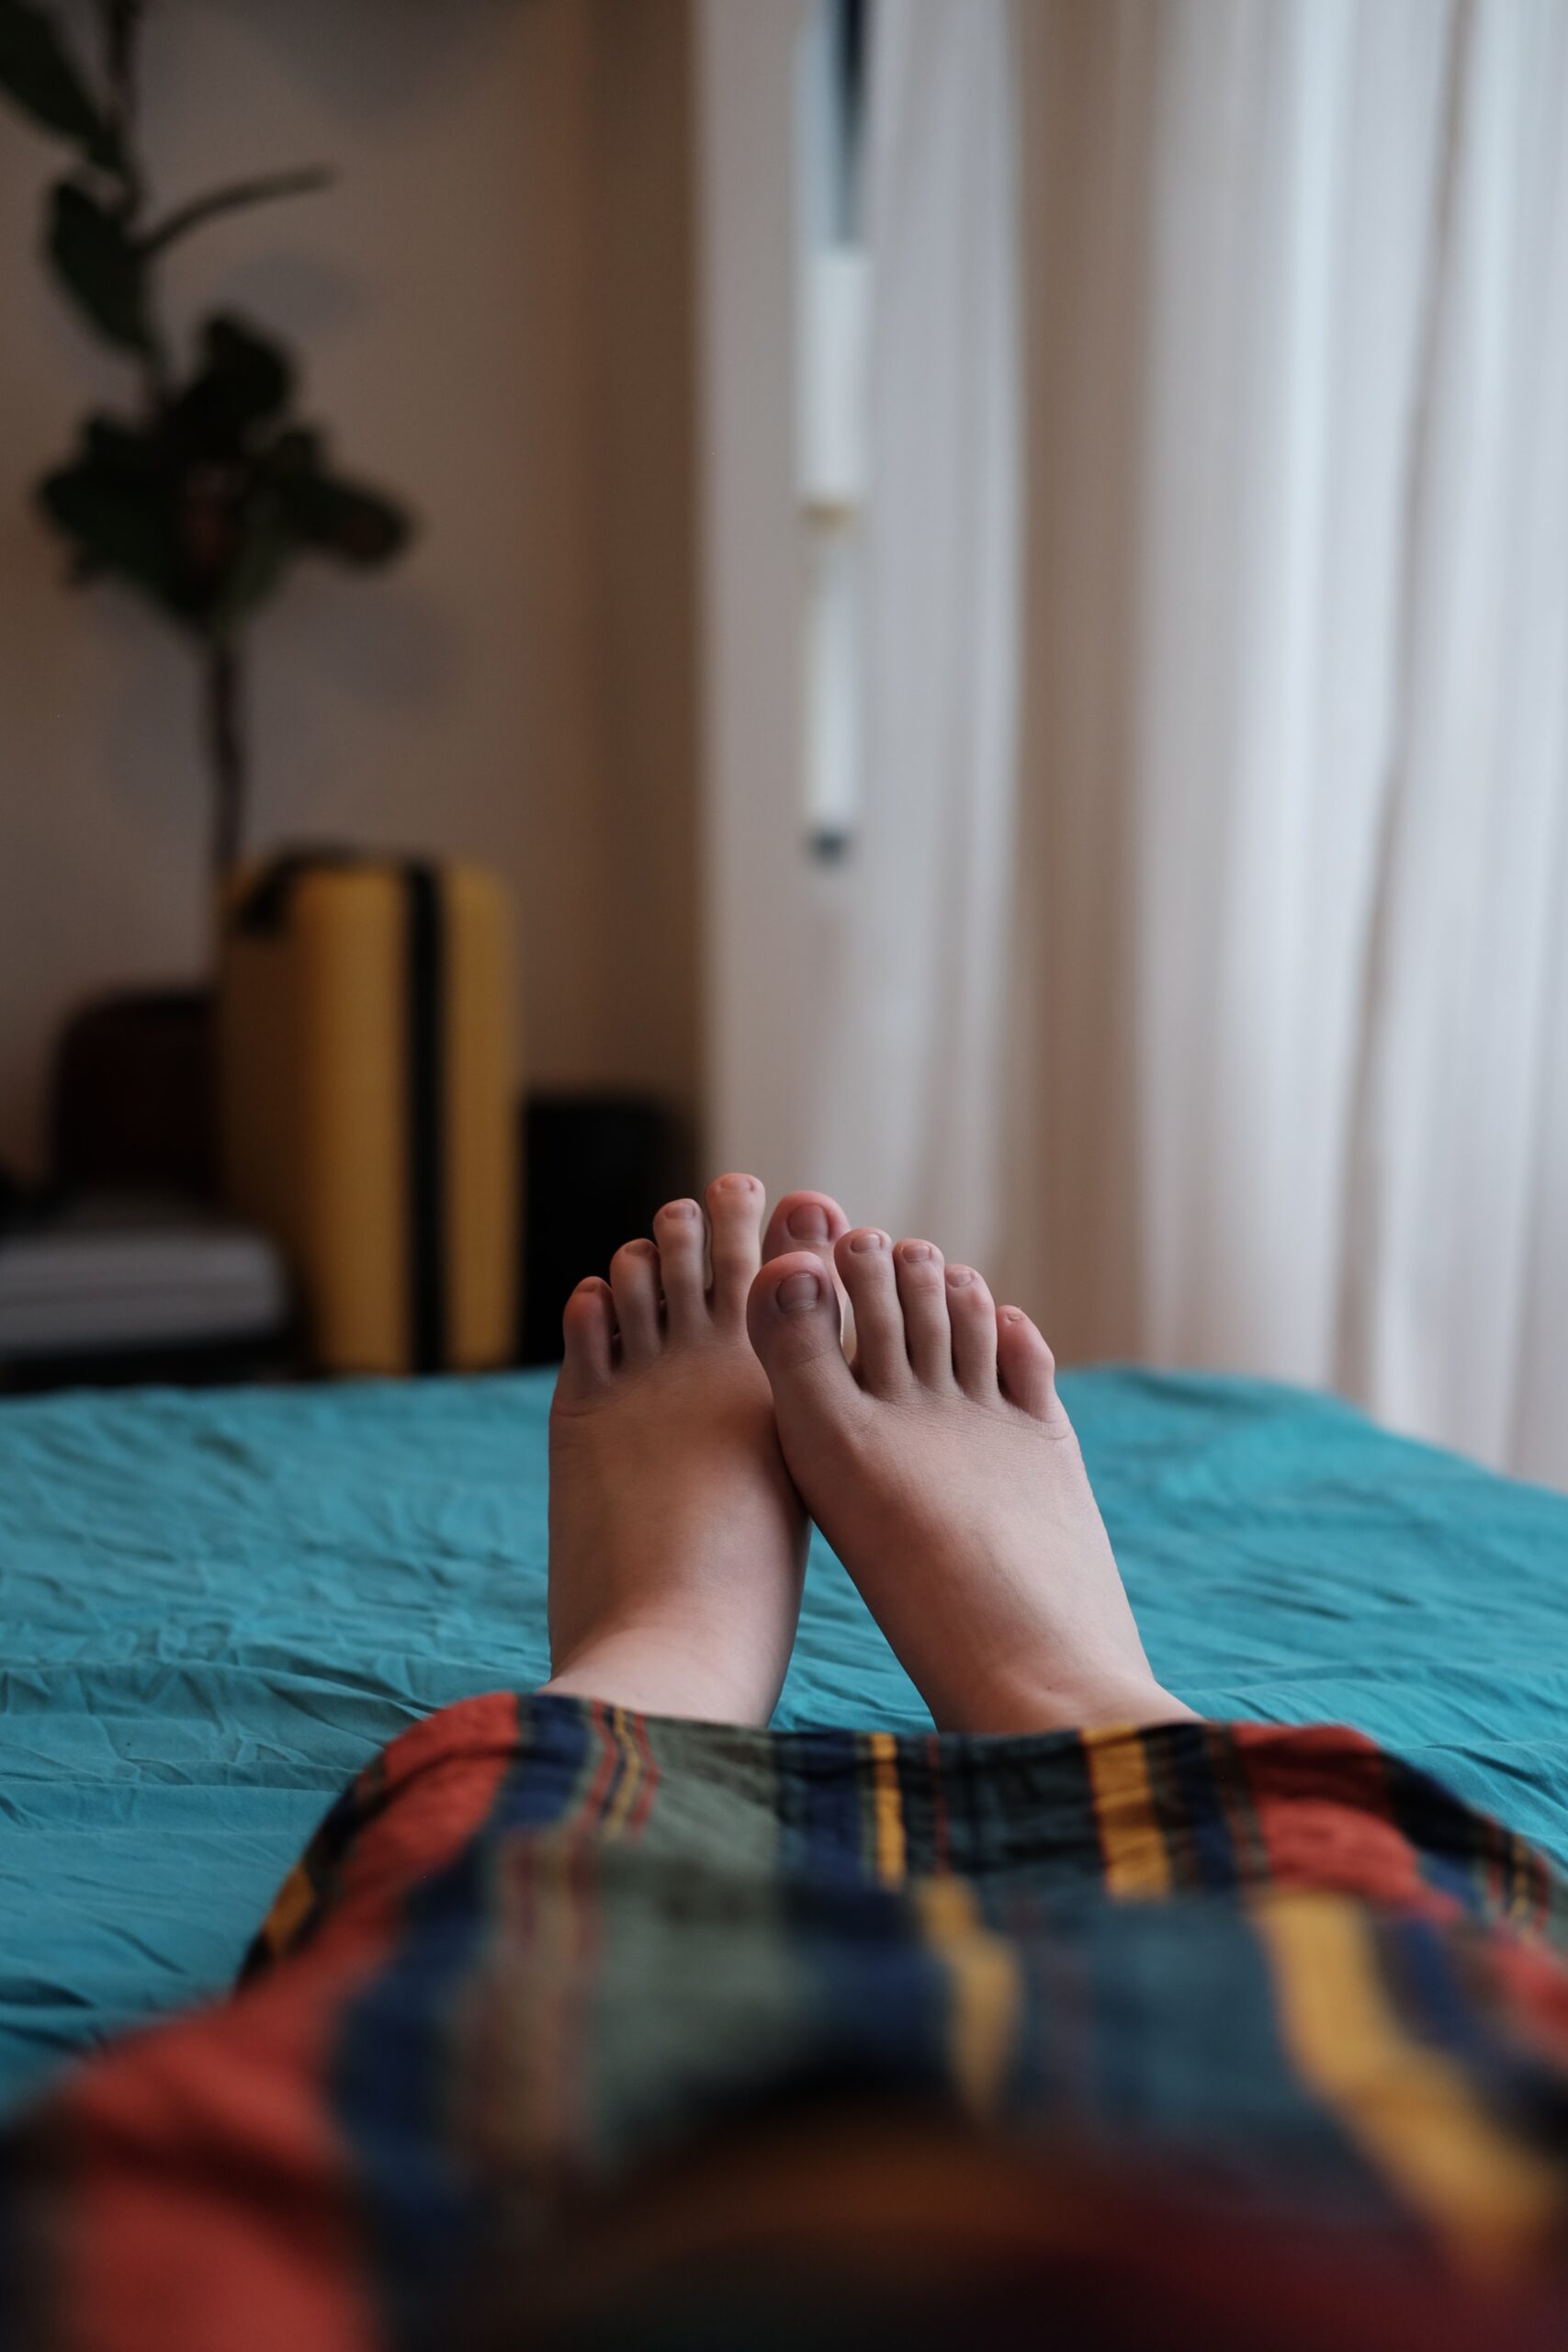 Bummed out over bunions: Do toe spacers and splints actually help relieve  pain and swelling? - CNA Lifestyle